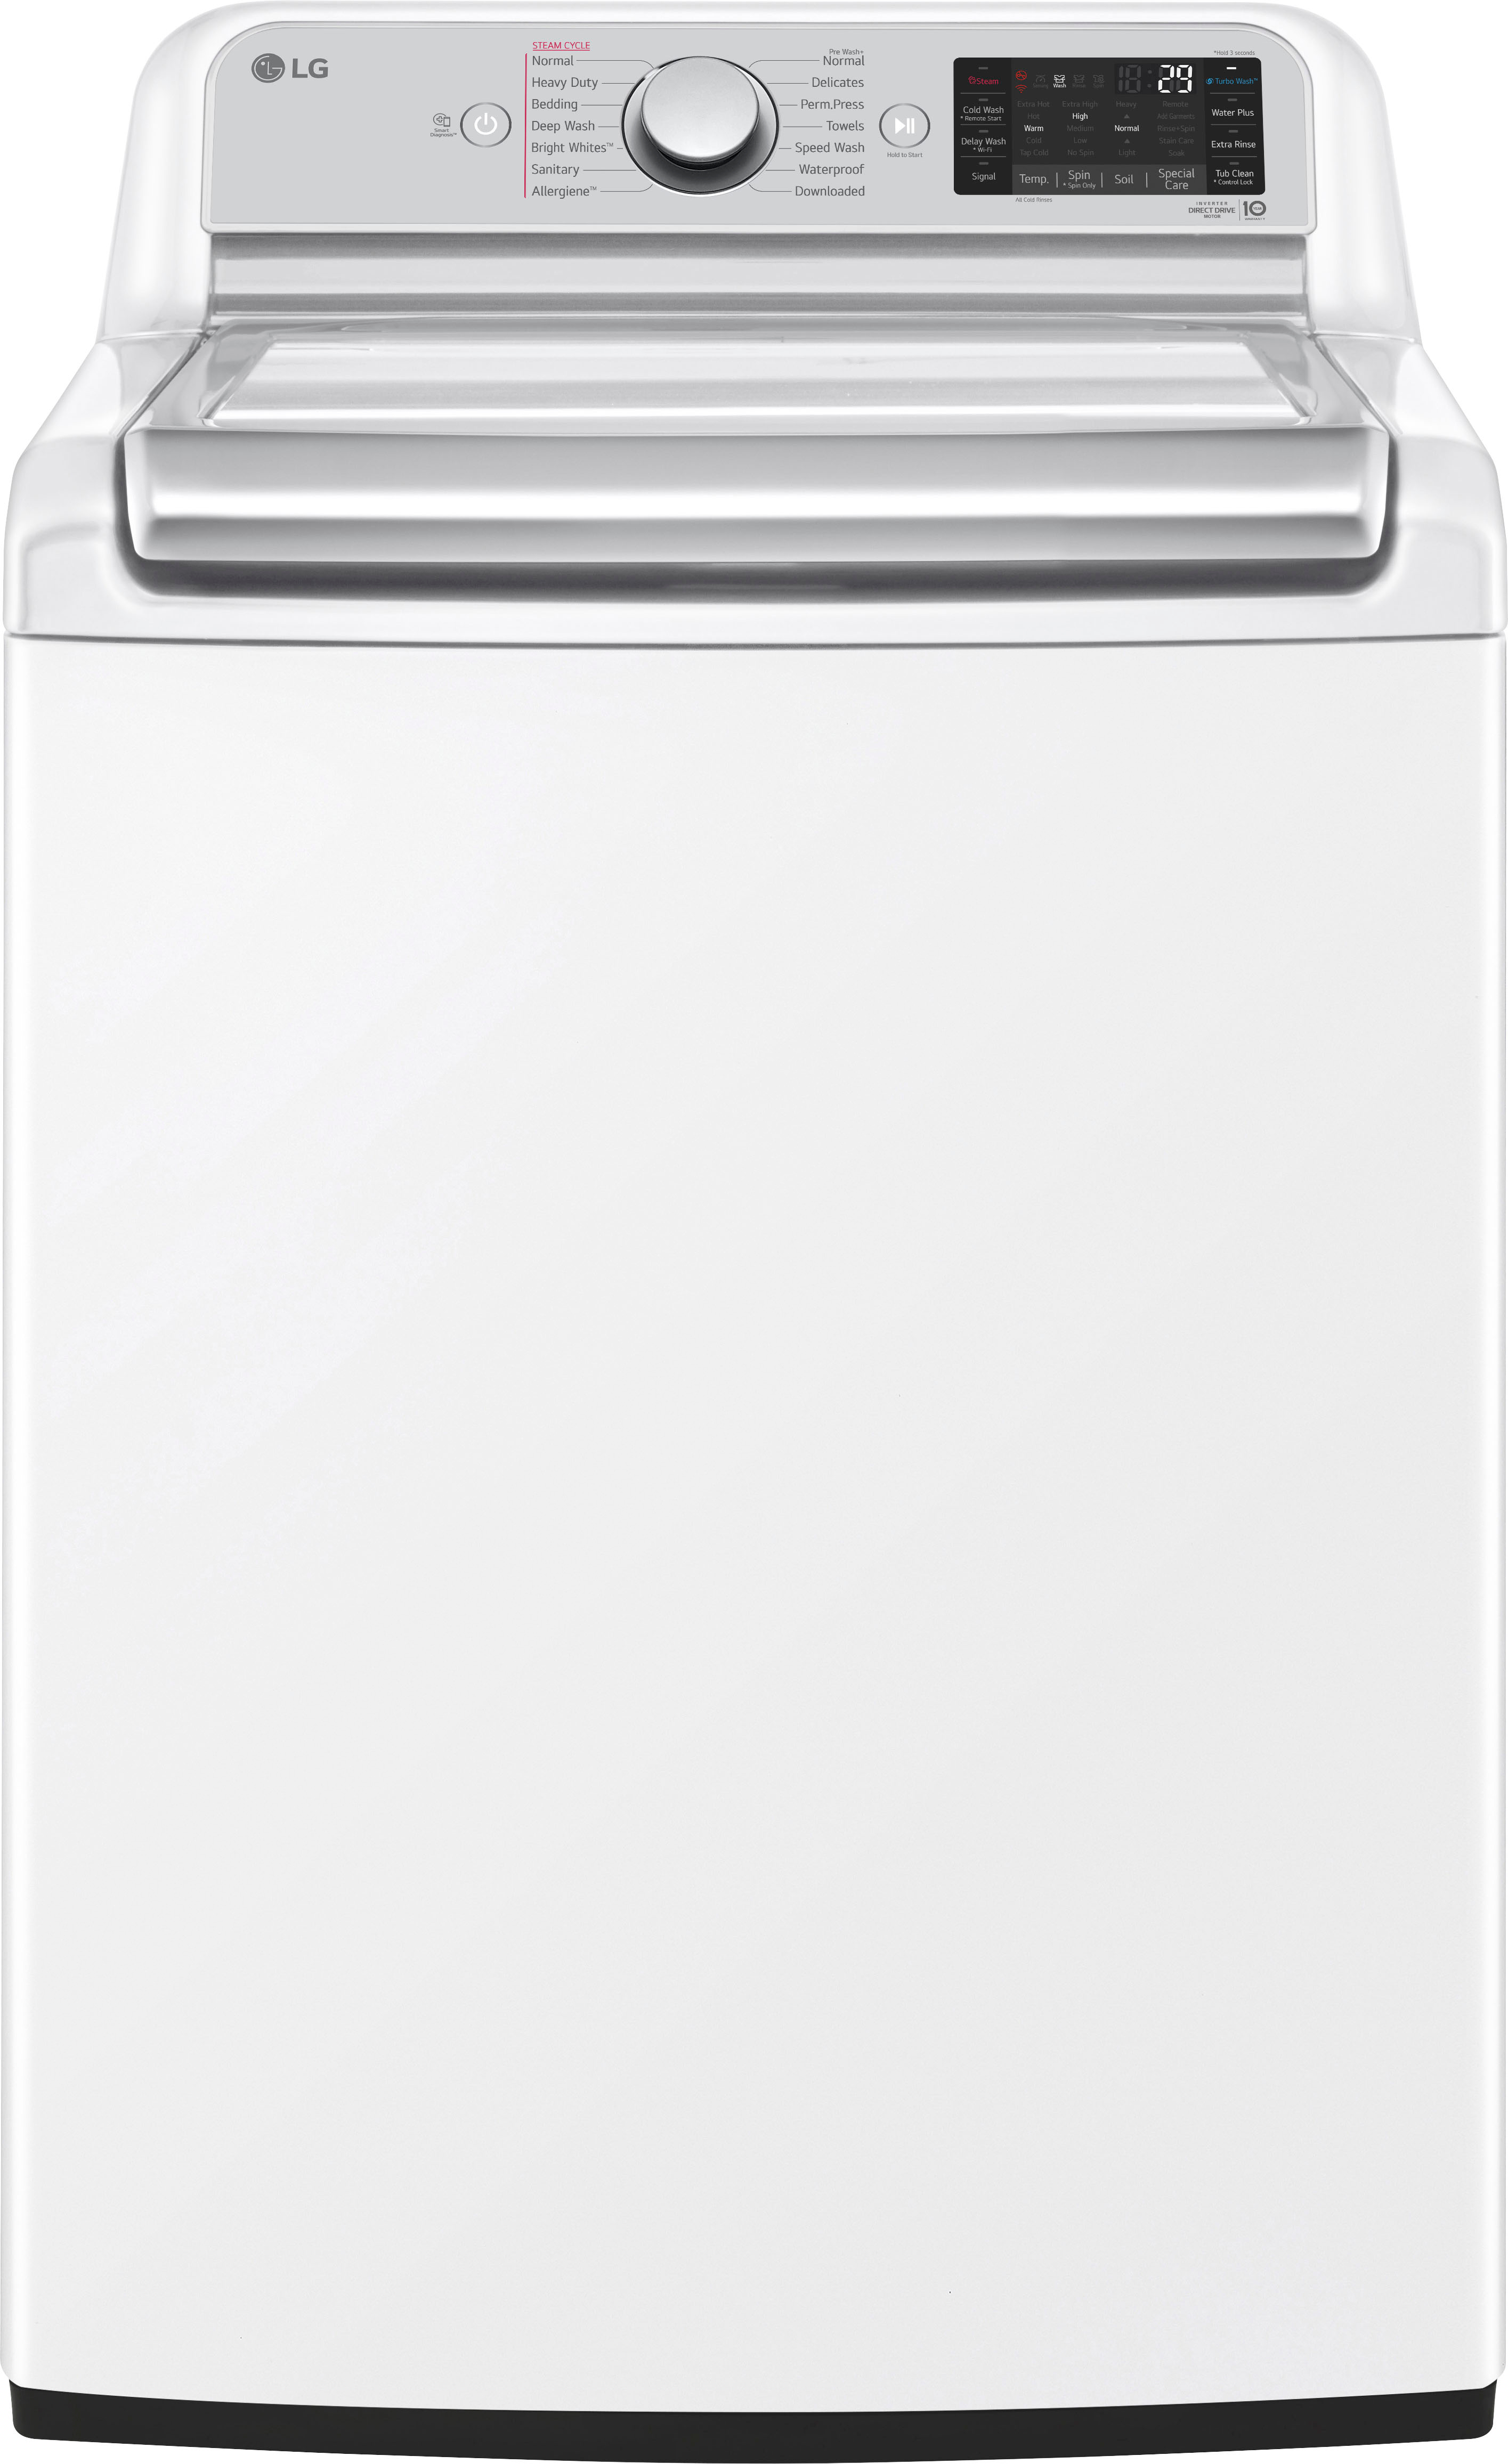 LG – 5.5 Cu. Ft. High-Efficiency Smart Top Load Washer with Steam and TurboWash3D Technology – White